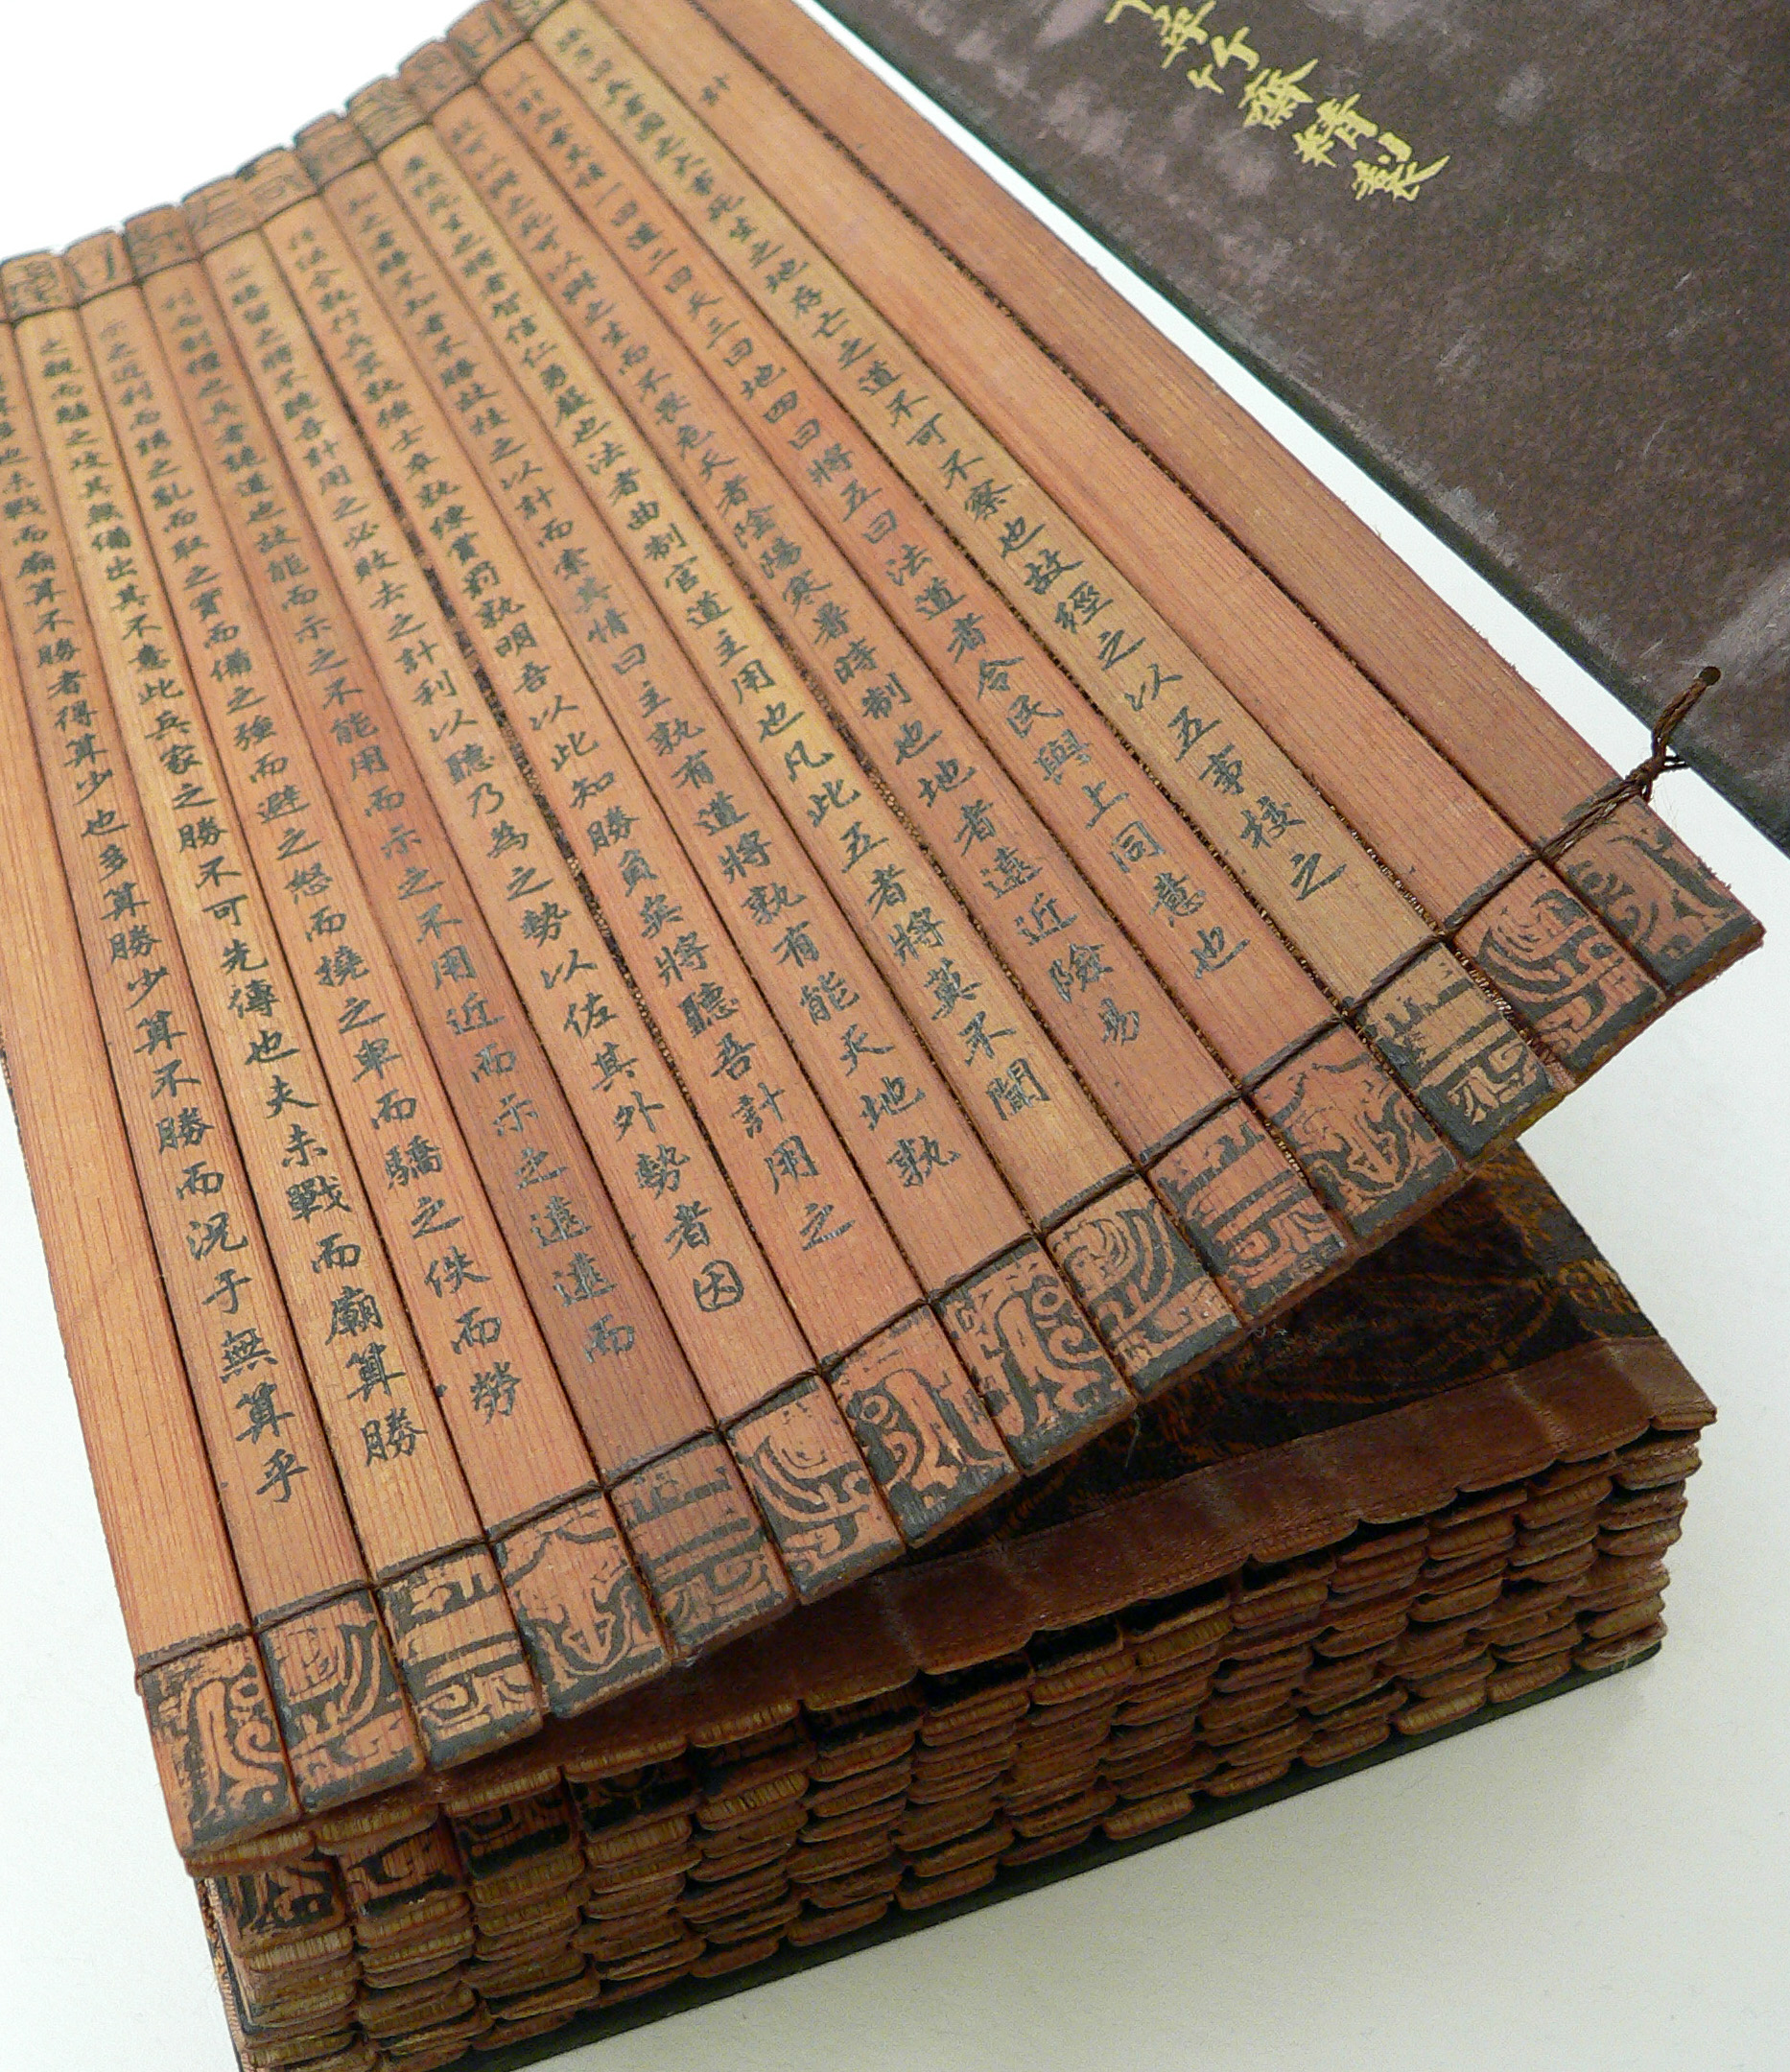 The “Art of War” by Sun Tzu was typically written on vertical slips of bamboo. Each slip offered a piece of advice, such as, “No nation ever benefited from a prolonged war” and “Let your plans be dark and impenetrable as night, and when you move, fall like a thunderbolt.” This copy is part of a collection at the University of Riverside, California. (Photo via Wikipedia) 